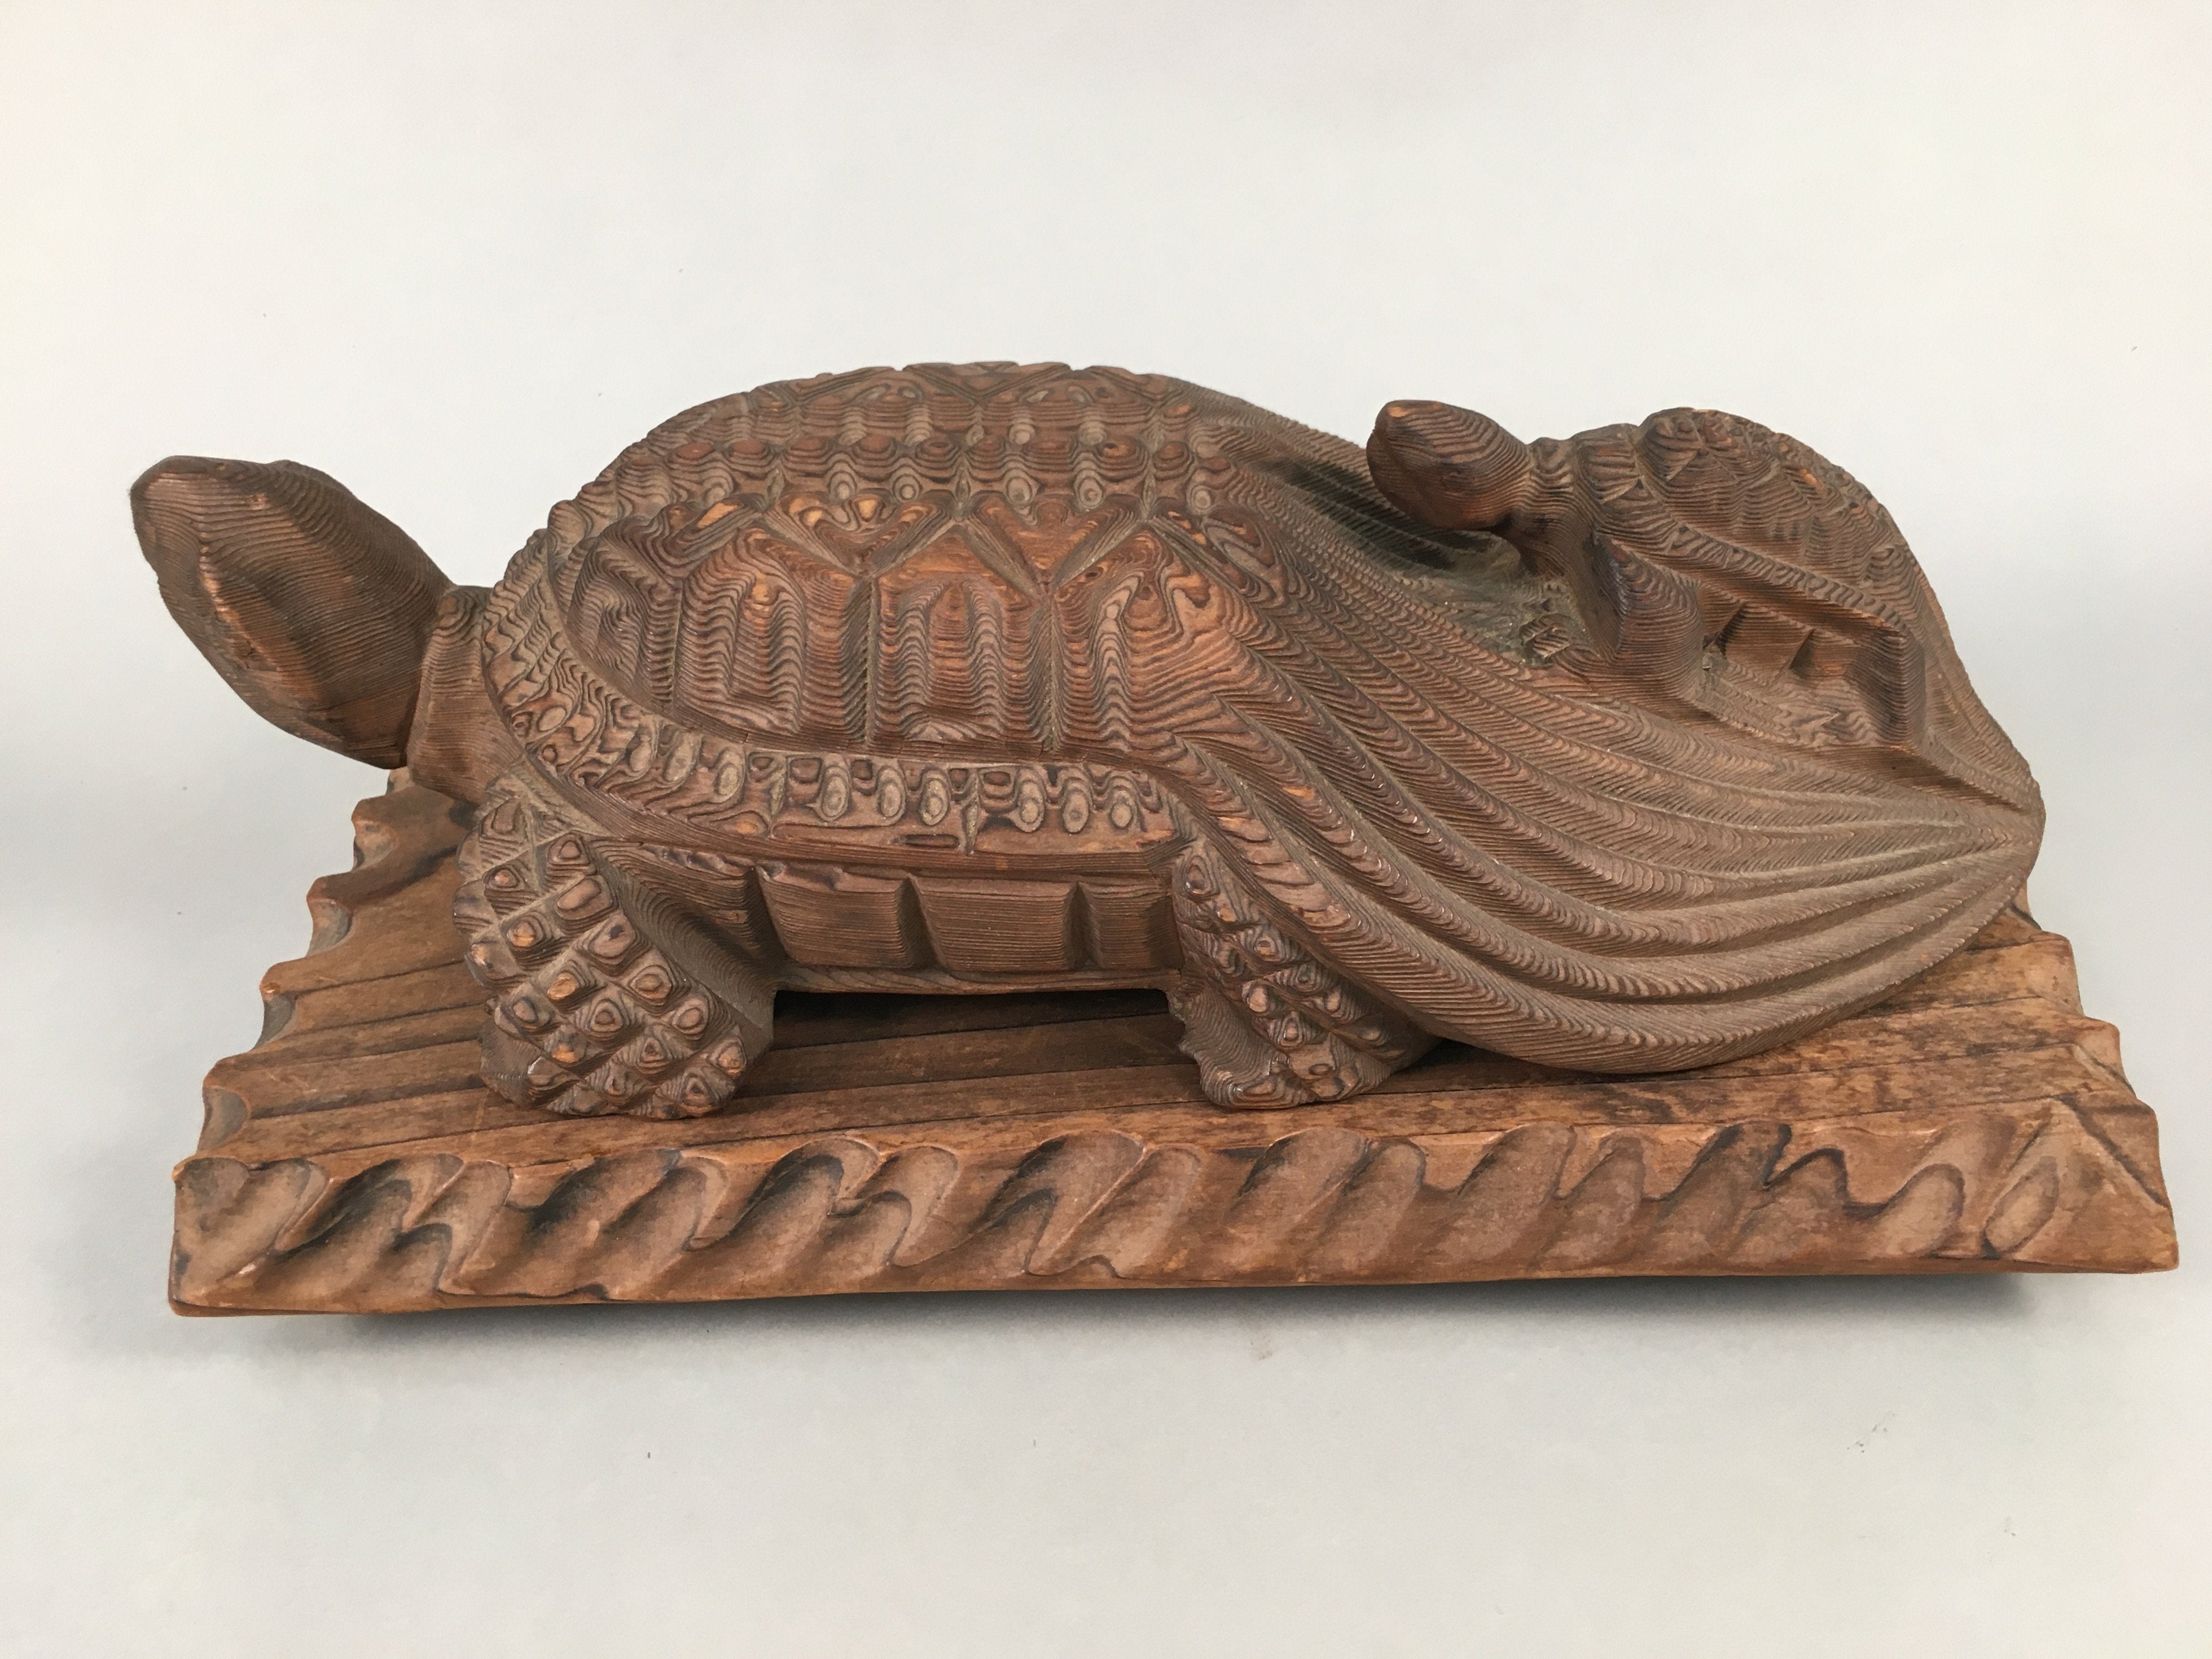 Japanese Wood Carving Vtg Turtle Brown Statue Figurine Lucky Charm BD621